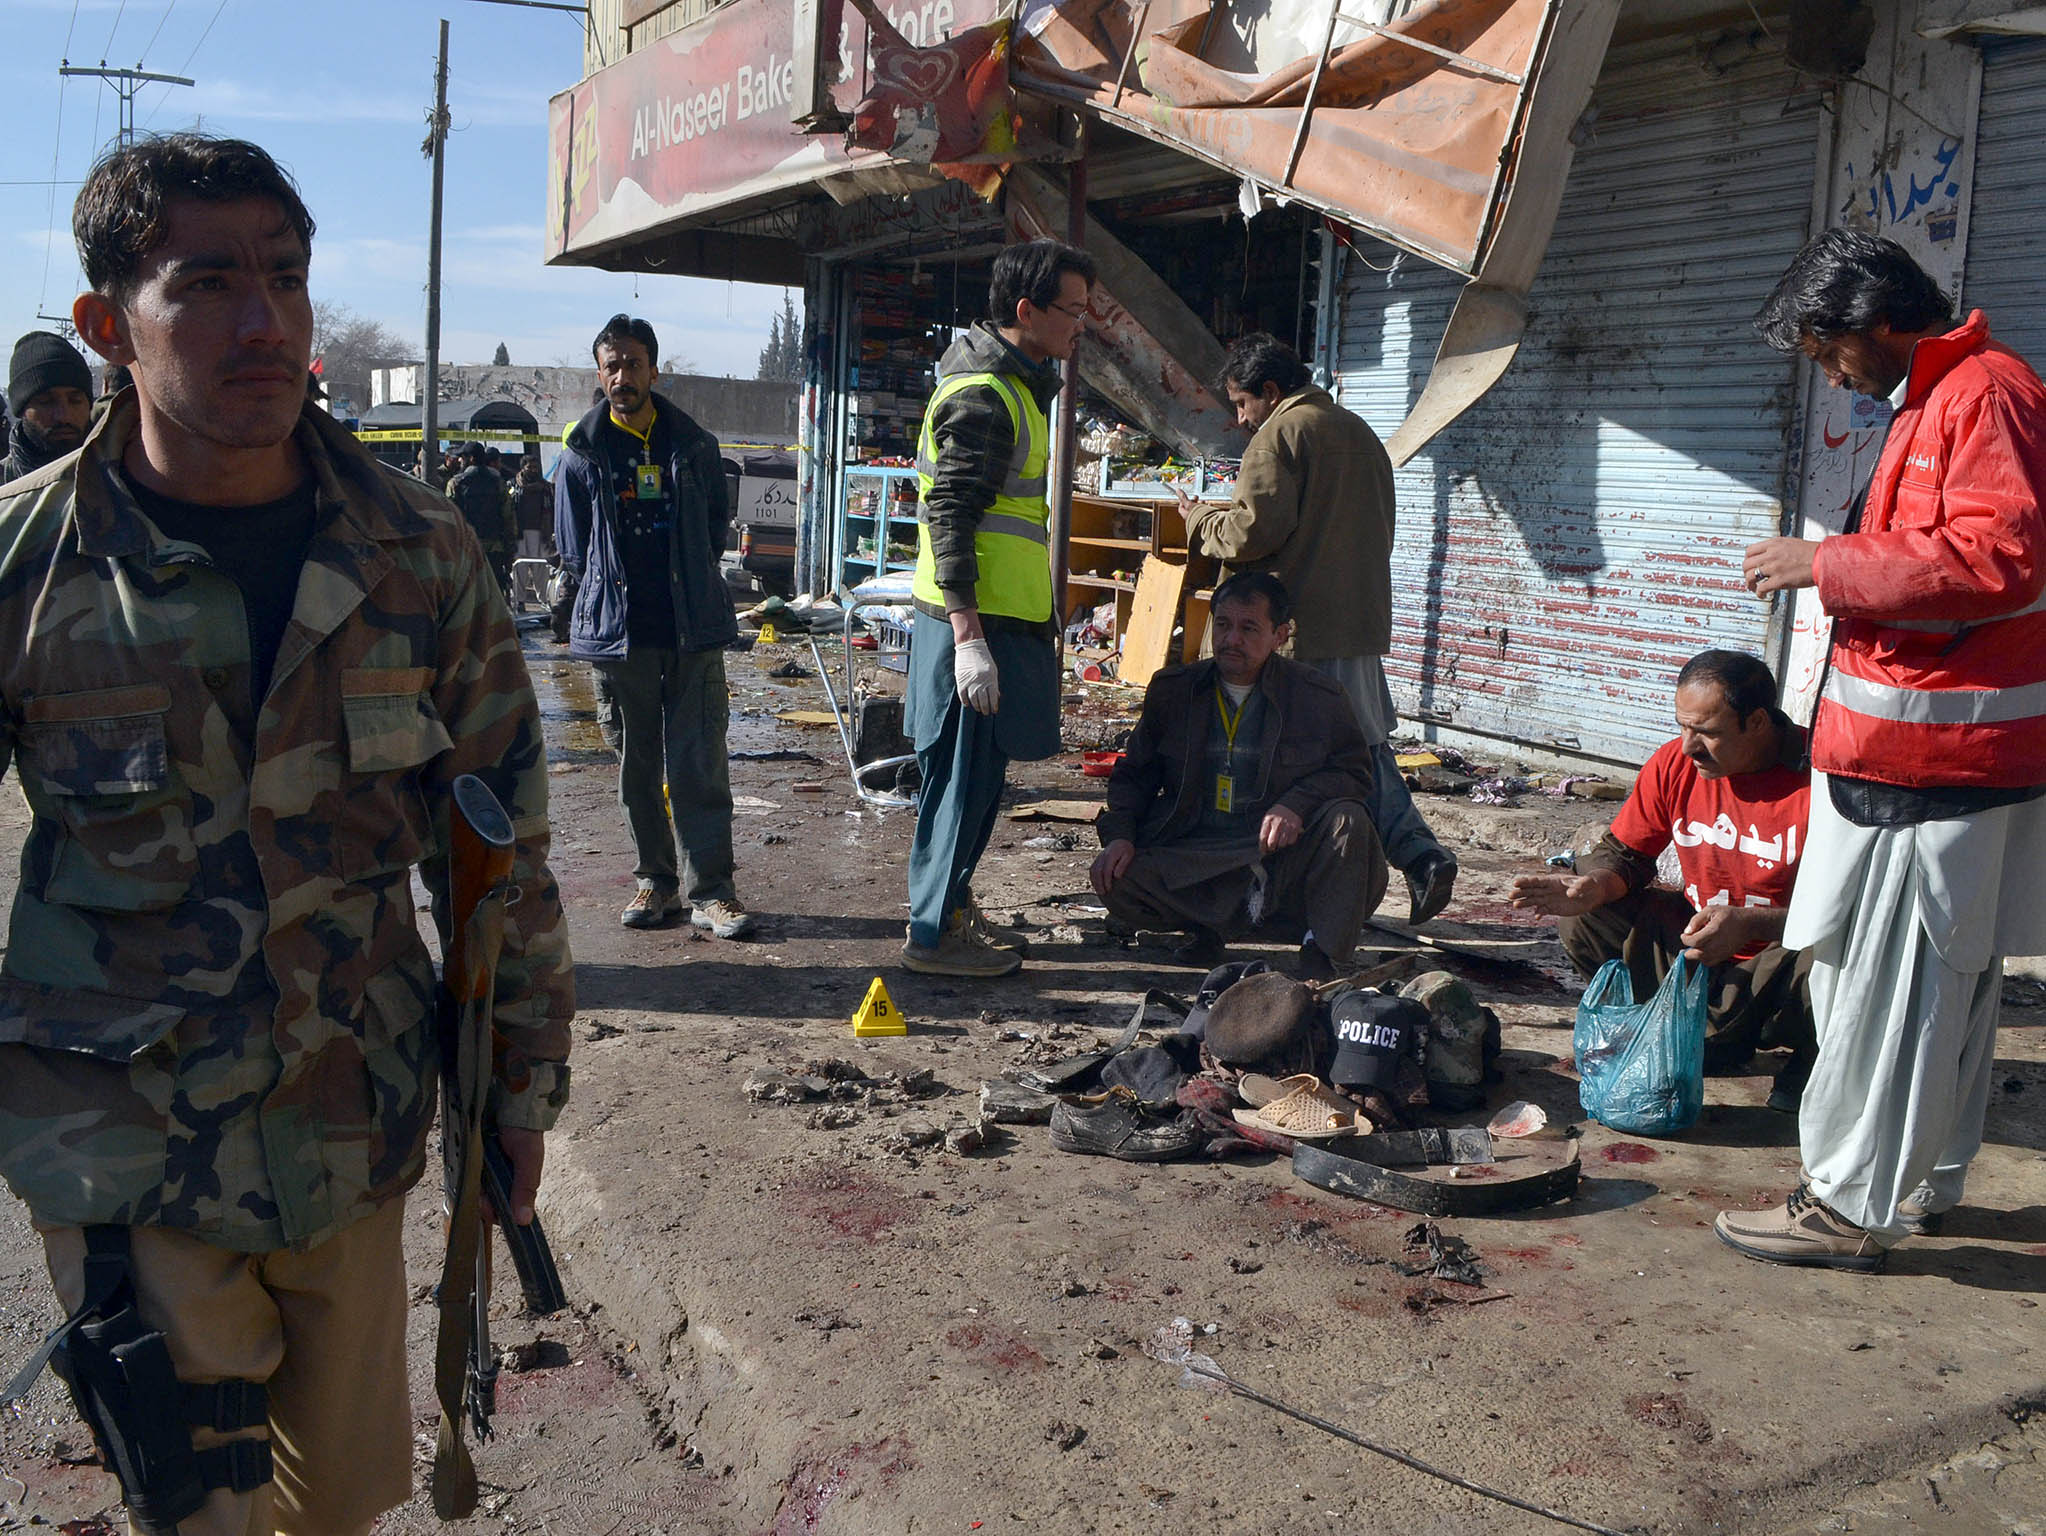 A suicide bomber attacked a polio eradication centre in Quetta because Islamist militants believe it is part of a Western plot